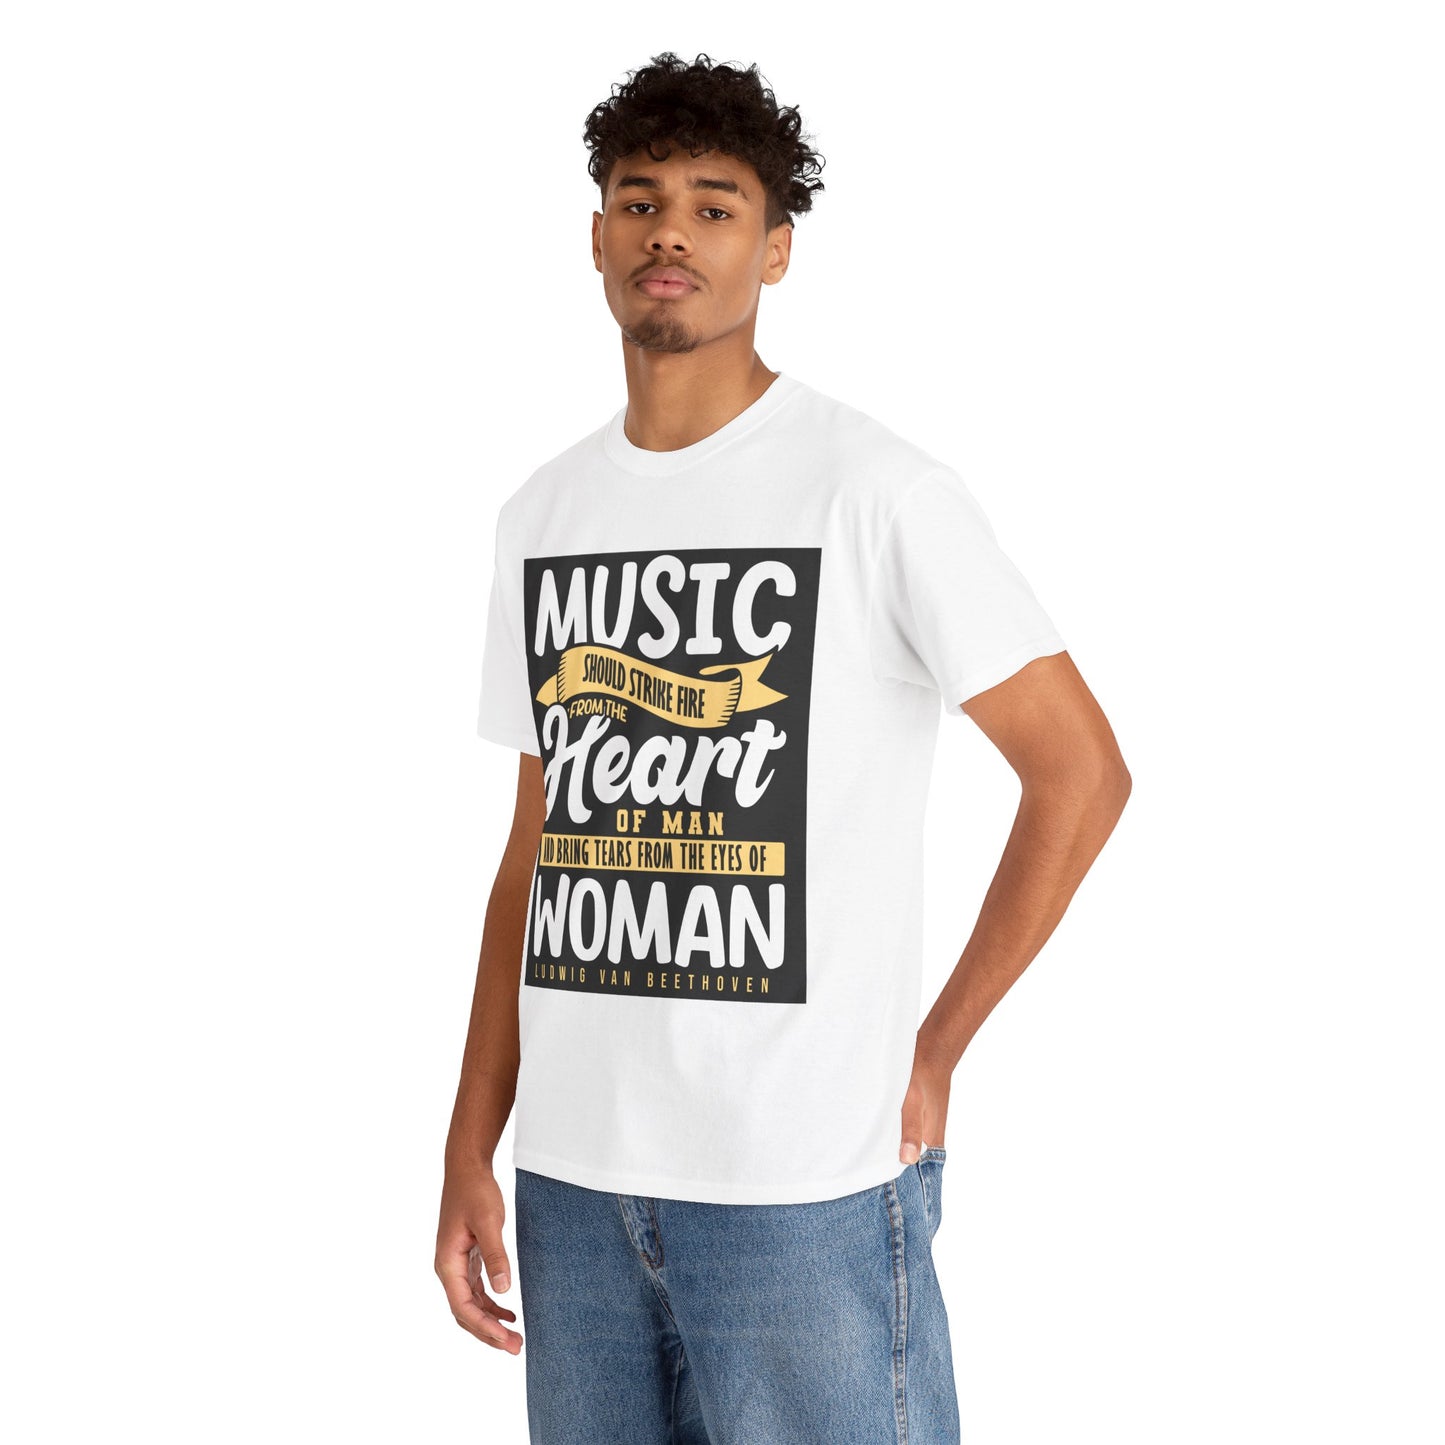 The Music Enthusiast T-Shirt: Music should strike fire from the heart